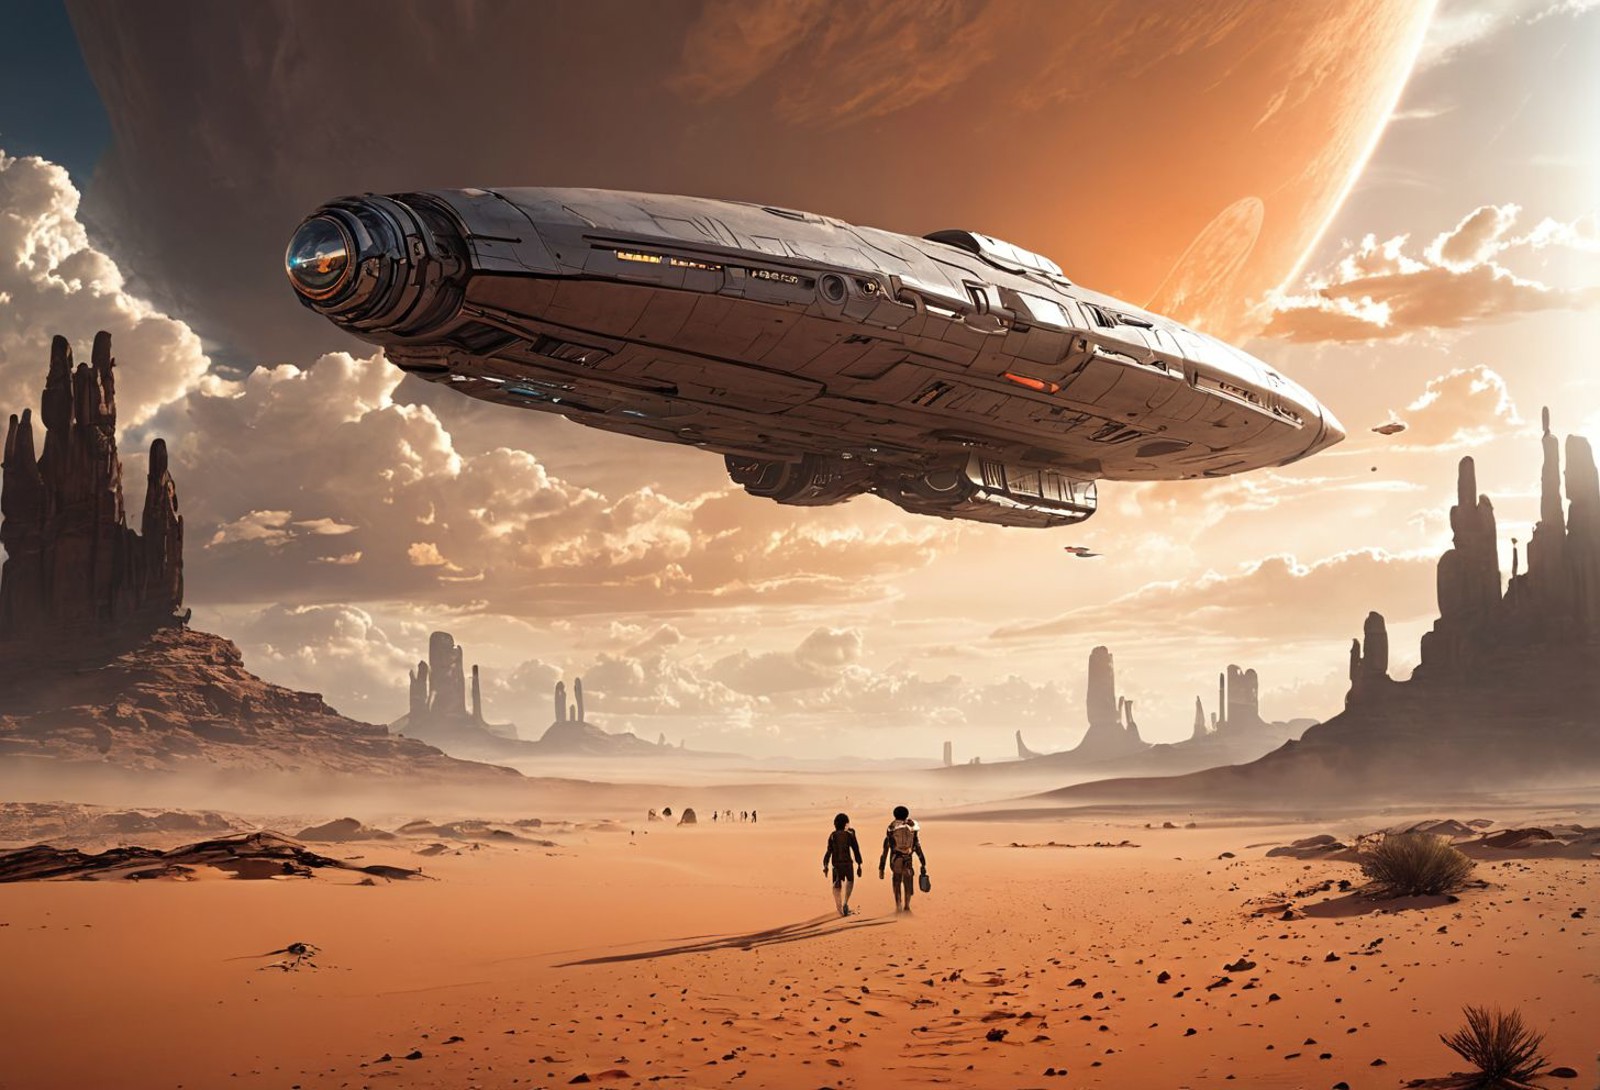 In the image, two people are walking in a desert-like environment, with a large spaceship flying overhead. The sky is fill...